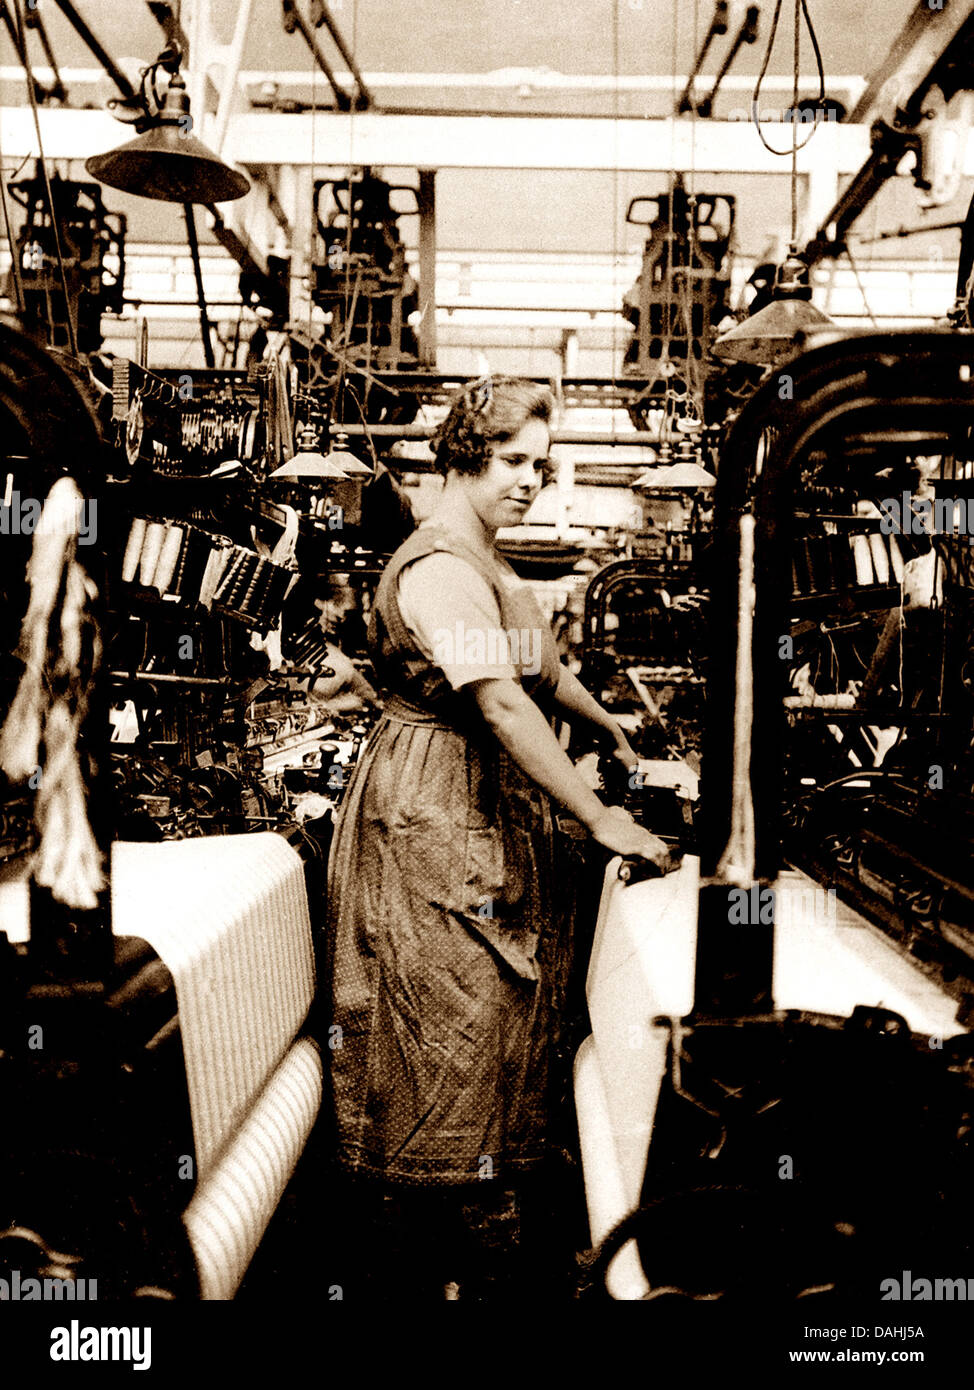 Textile worker early 1900s Stock Photo